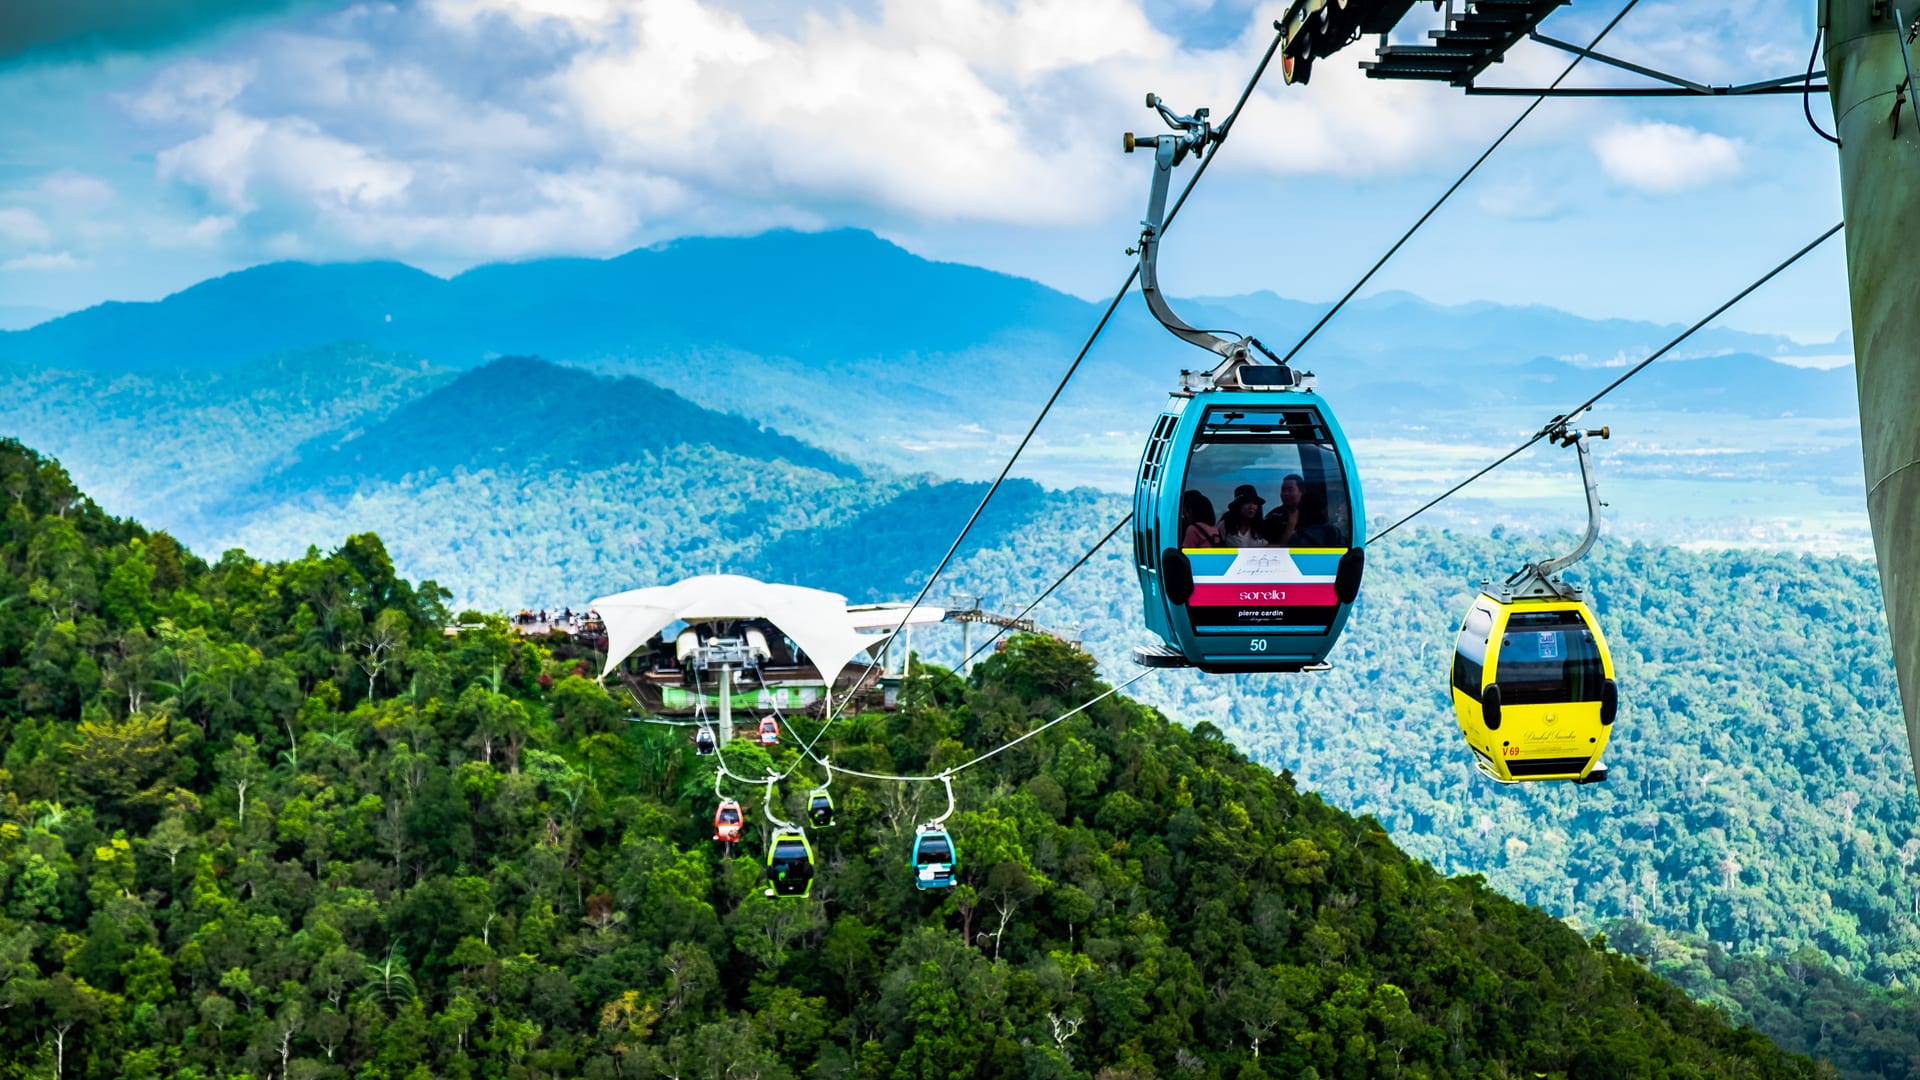 places to visit in langkawi, travel, trip, attractions